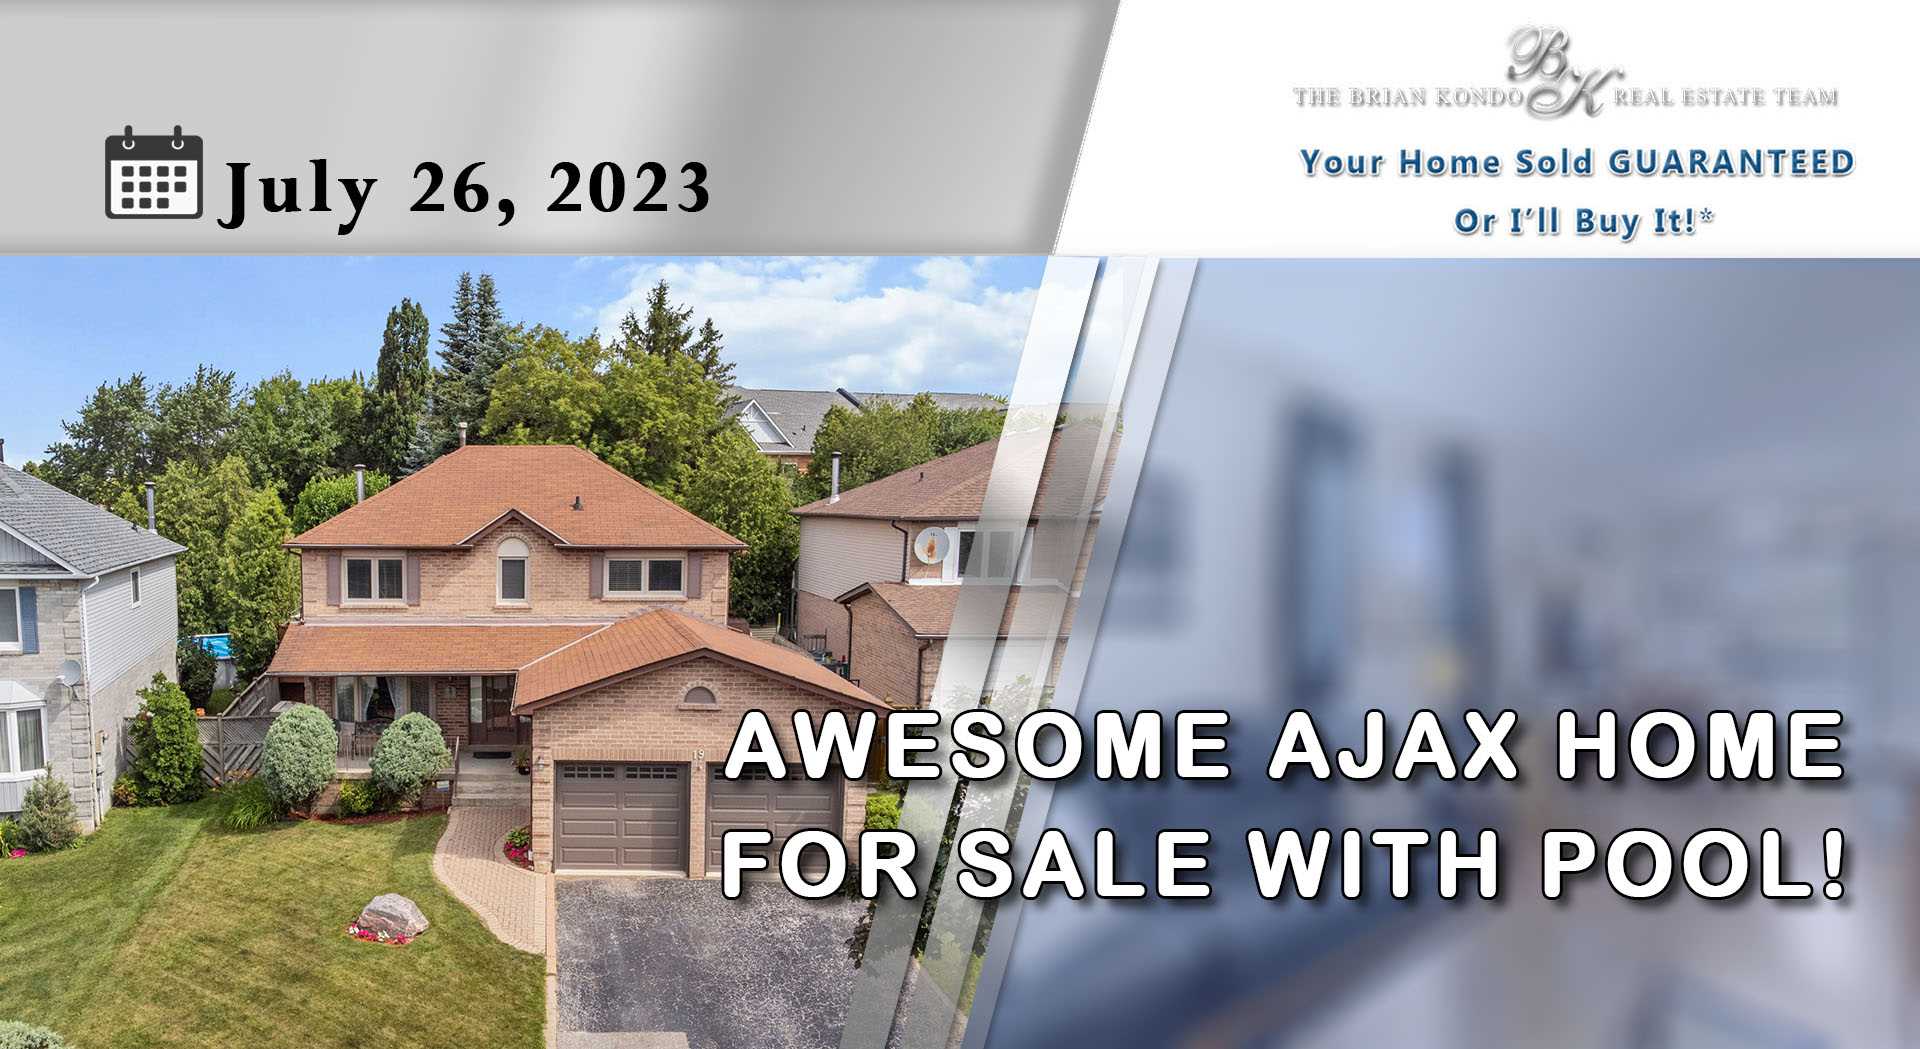 AWESOME AJAX HOME FOR SALE WITH POOL! | The Brian Kondo Real Estate Team